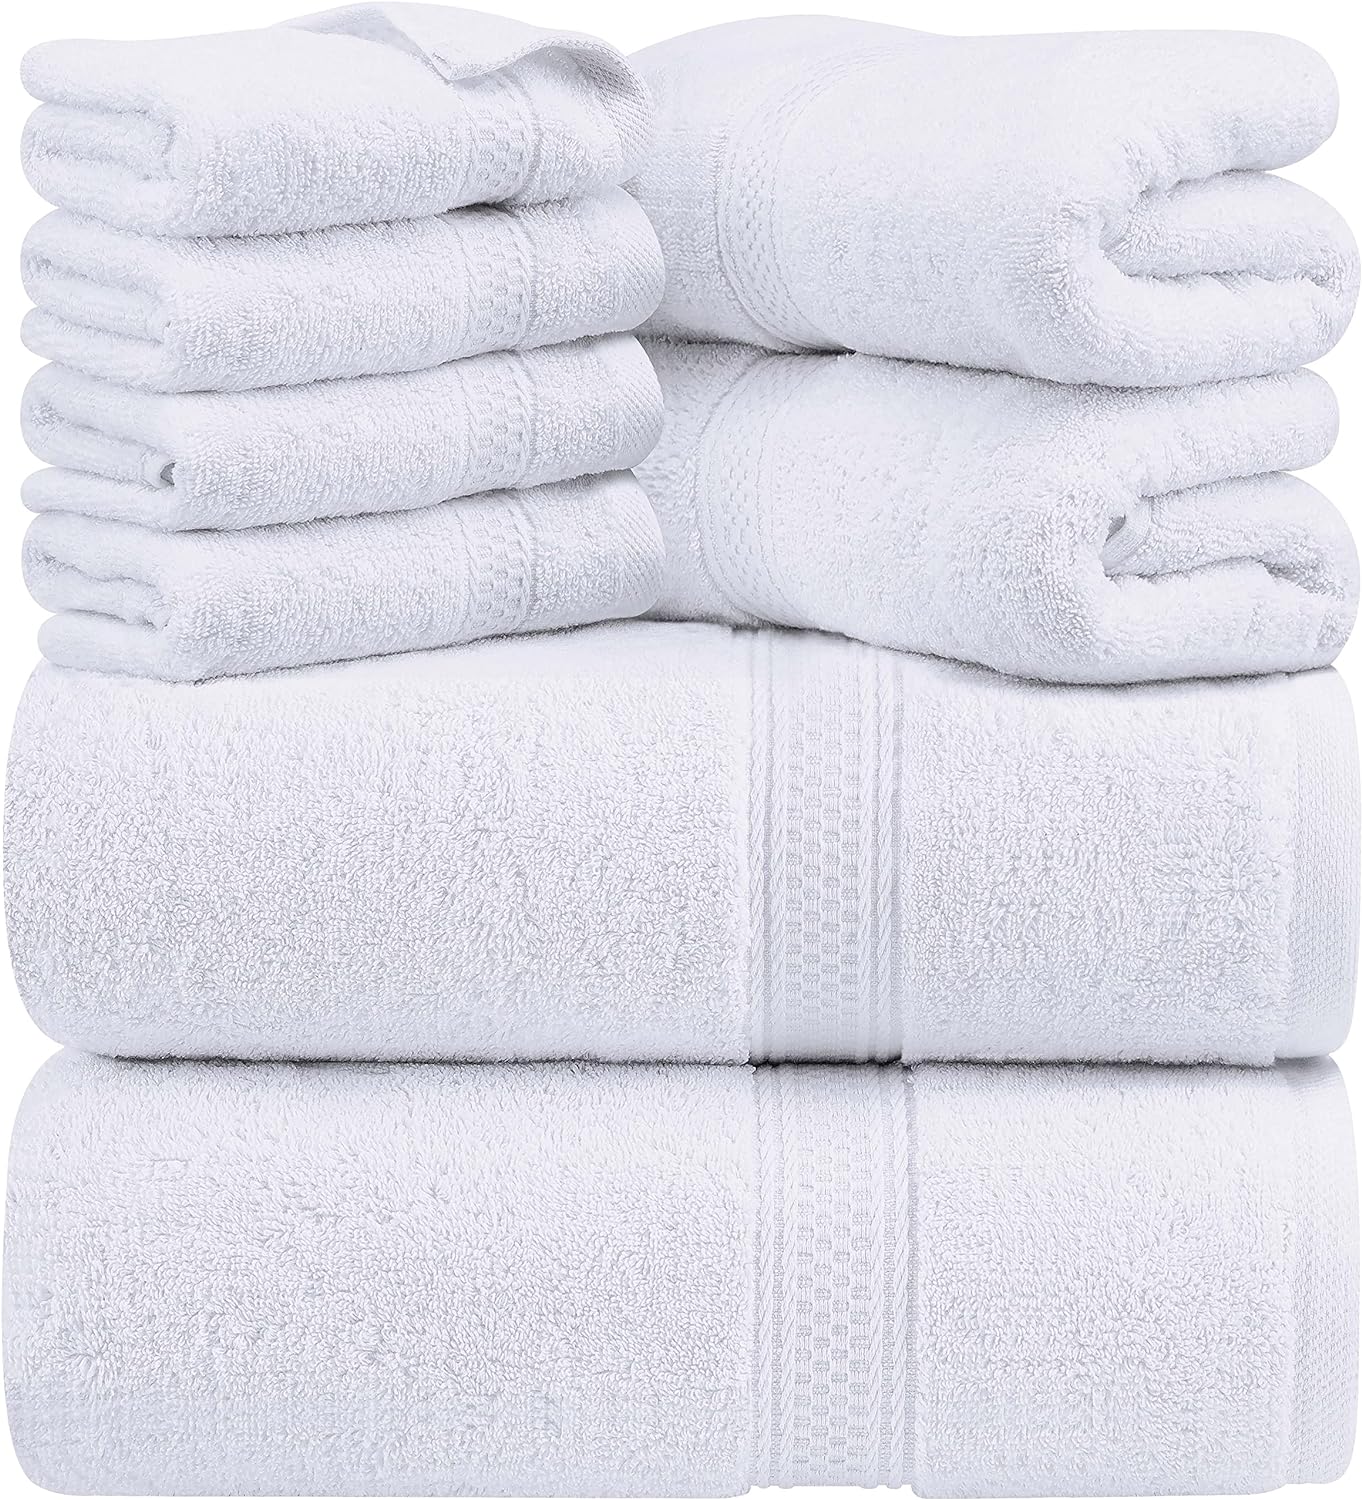 Set of 8 very absorbent towels 100% cotton